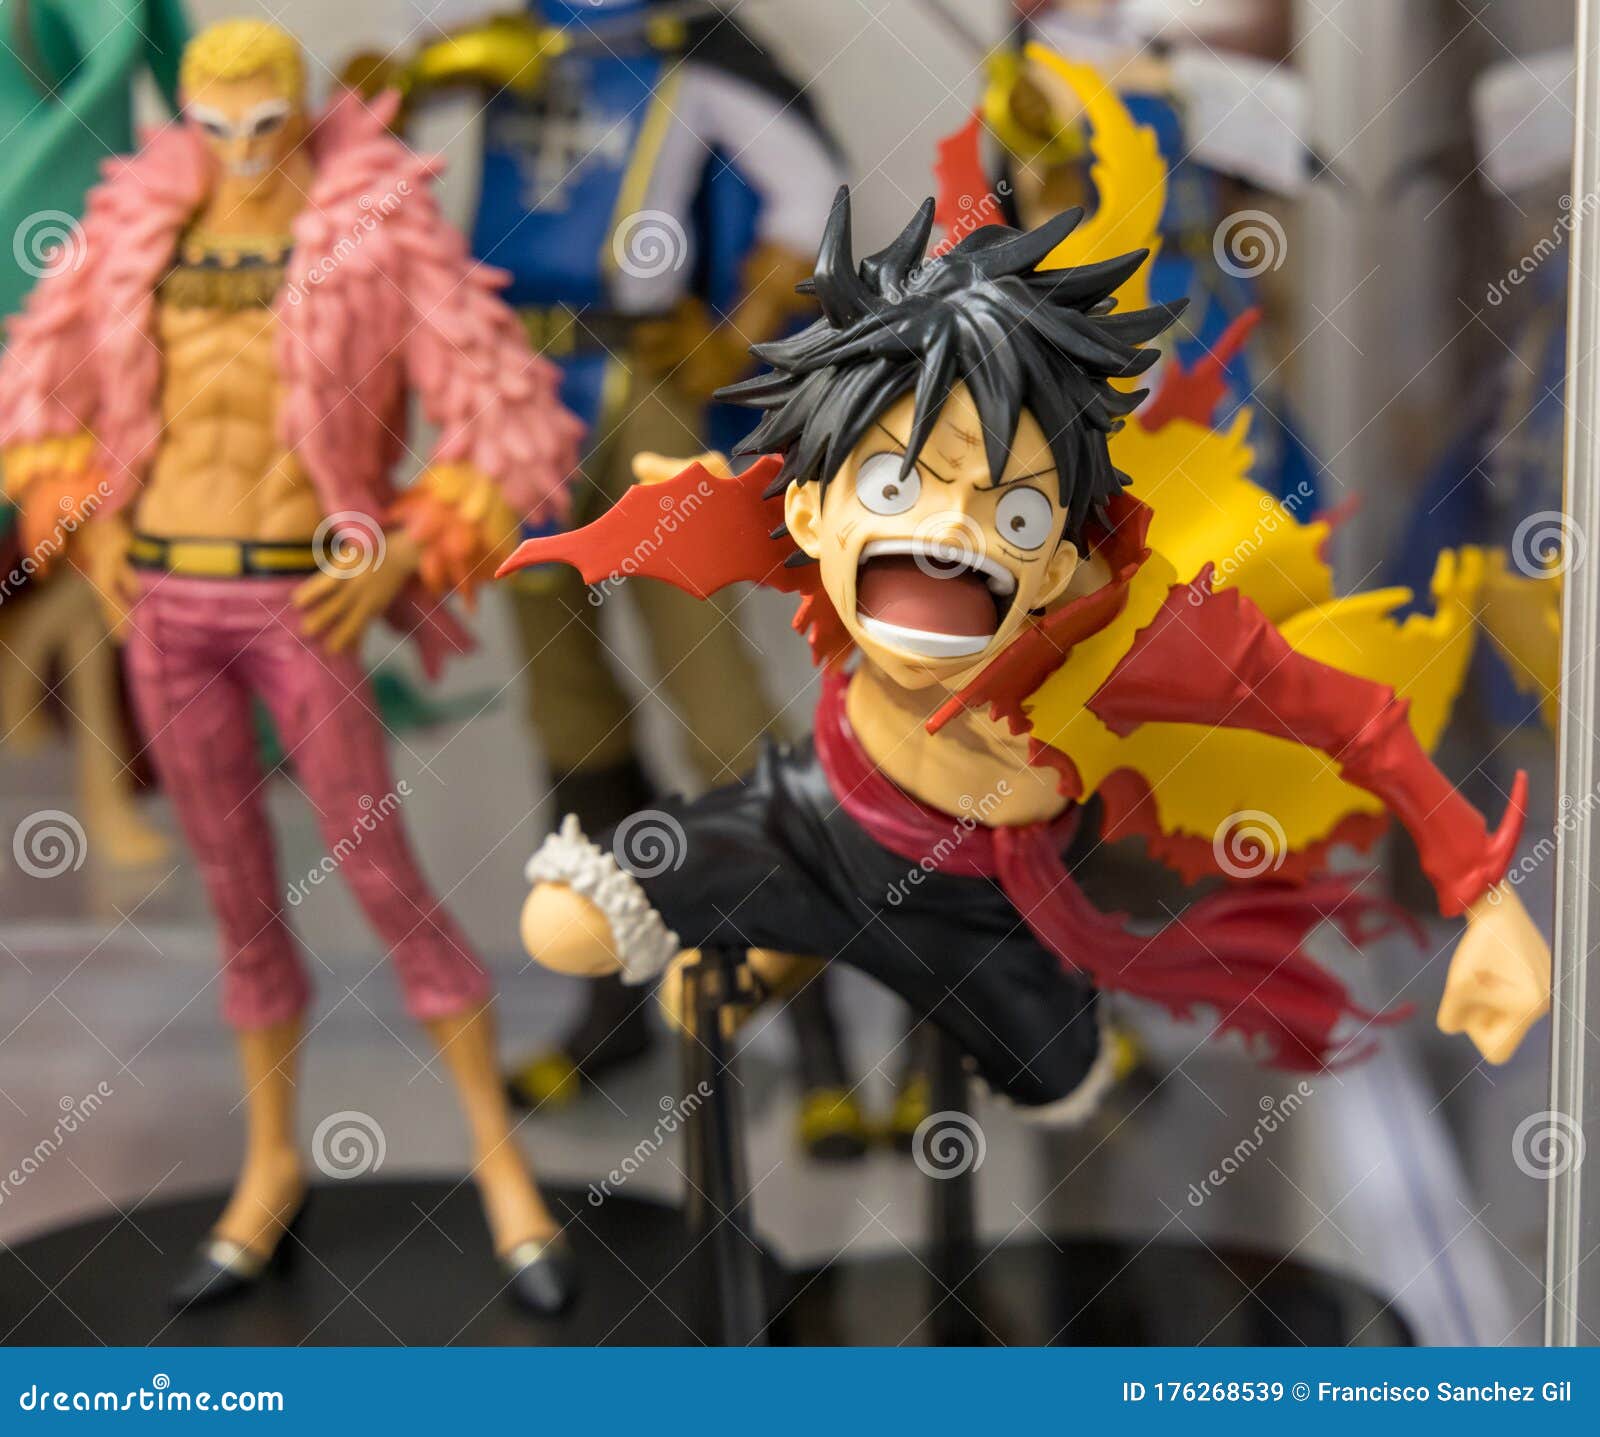 Tokyo Japan 10 09 19 Luffy Figure From One Piece Jumping To Front In Attack Pose Editorial Stock Image Image Of Comic Japanese